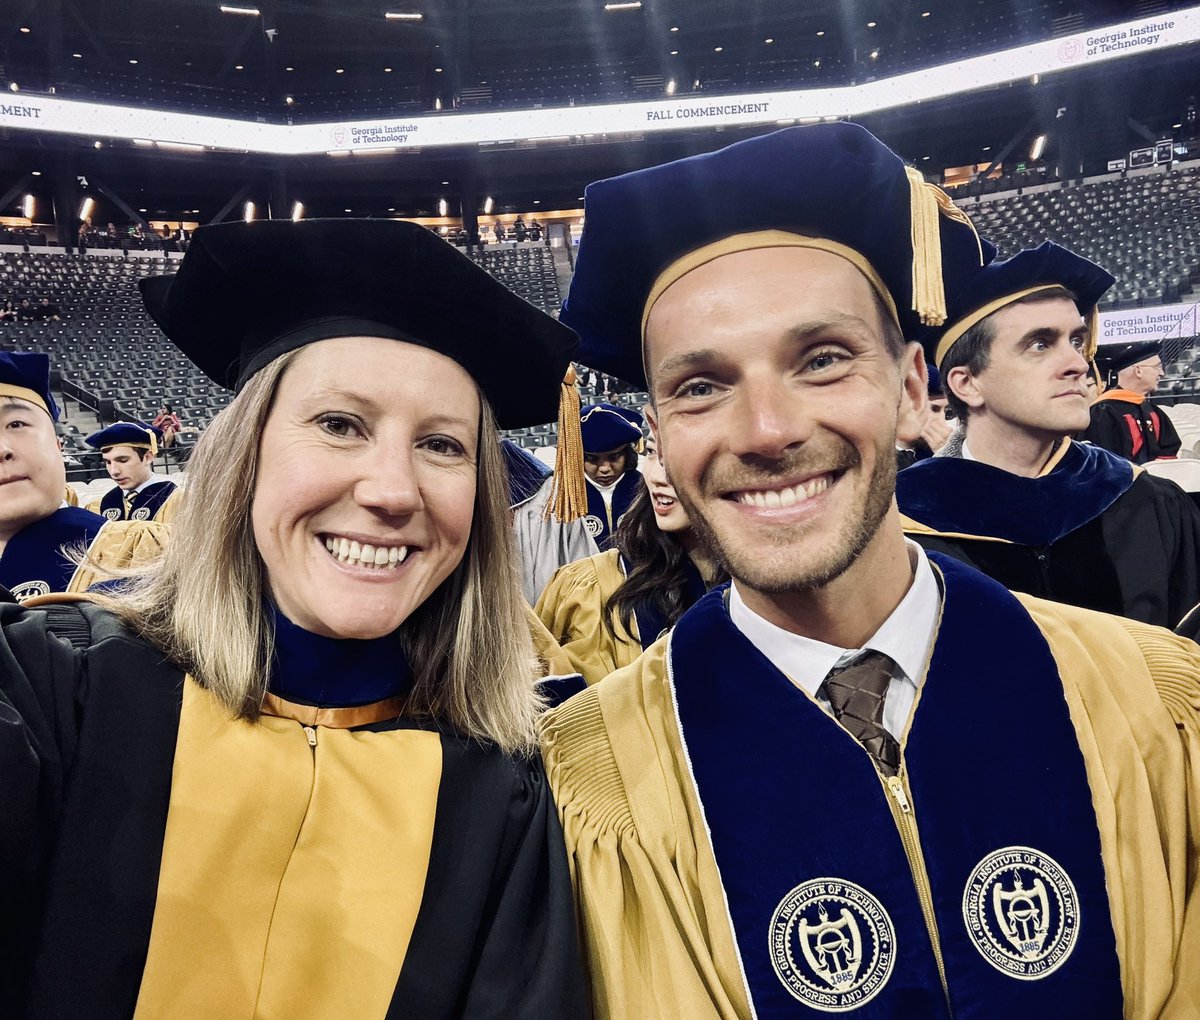 Congratulations to all the @GeorgiaTech graduates this weekend! And a special congratulations to the newest @walton_lab PhD, Dr. @LukasBingel! So proud of you Lukas! 🎉🍾